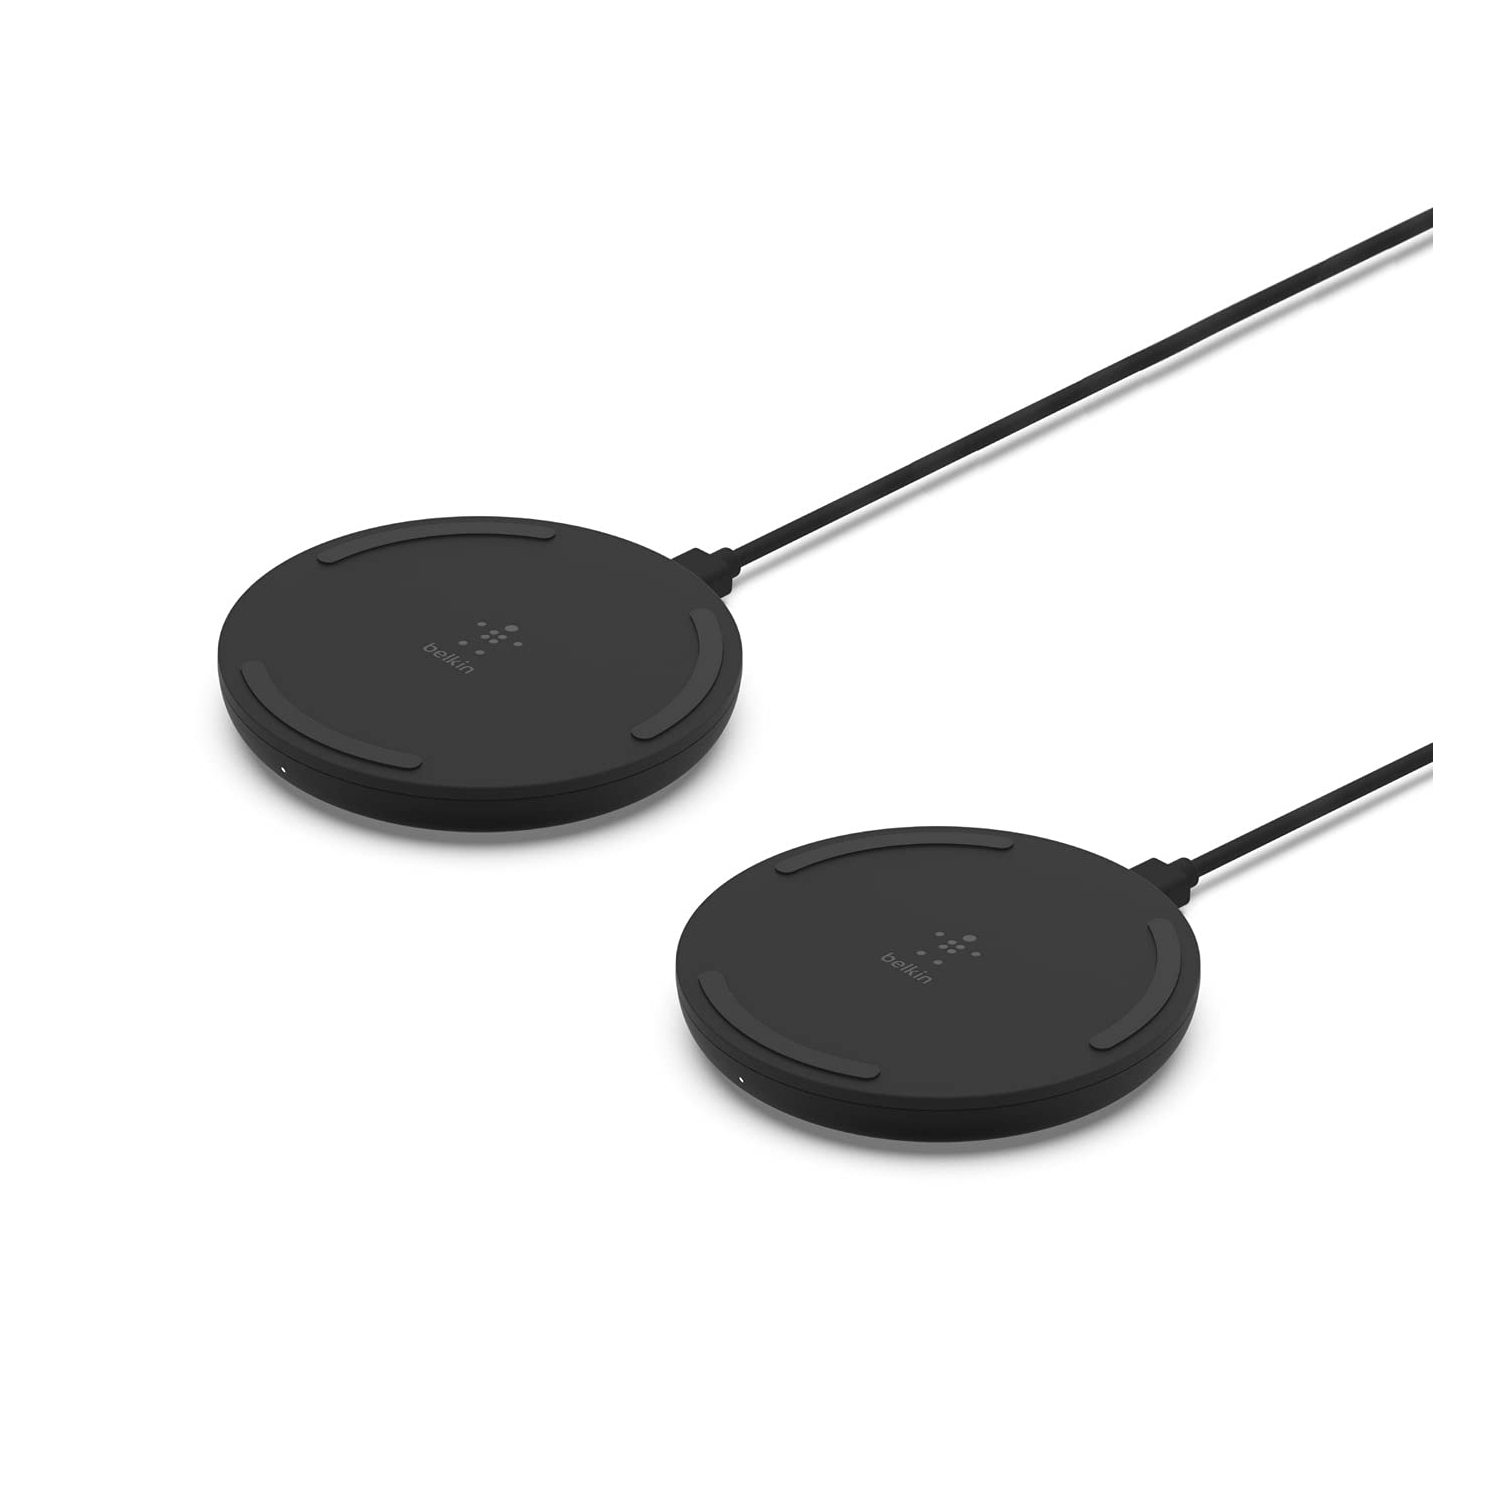 Quick Charge Wireless Charging Pad - 2-Pack - 10W Qi- Charger Pad for iPhone, Samsung Galaxy, Apple Airpods Pro & More - Charge While Listening to Music & Streaming Videos - Black